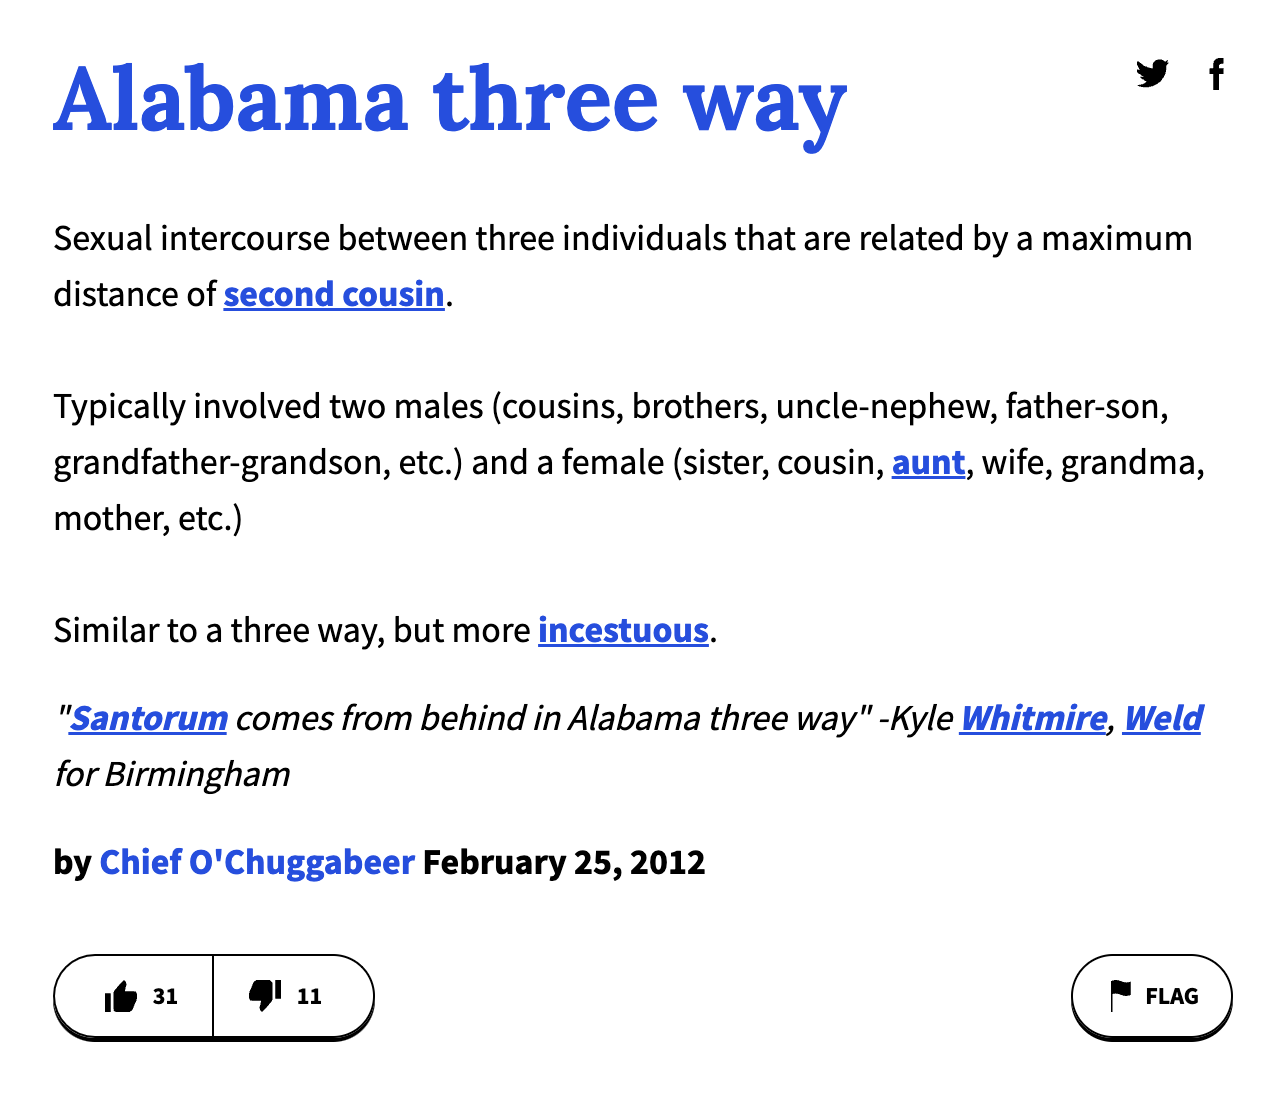 urban dictionary terms - angle - Alabama three way Sexual intercourse between three individuals that are related by a maximum distance of second cousin. Typically involved two males cousins, brothers, unclenephew, fatherson, grandfathergrandson, etc. and 